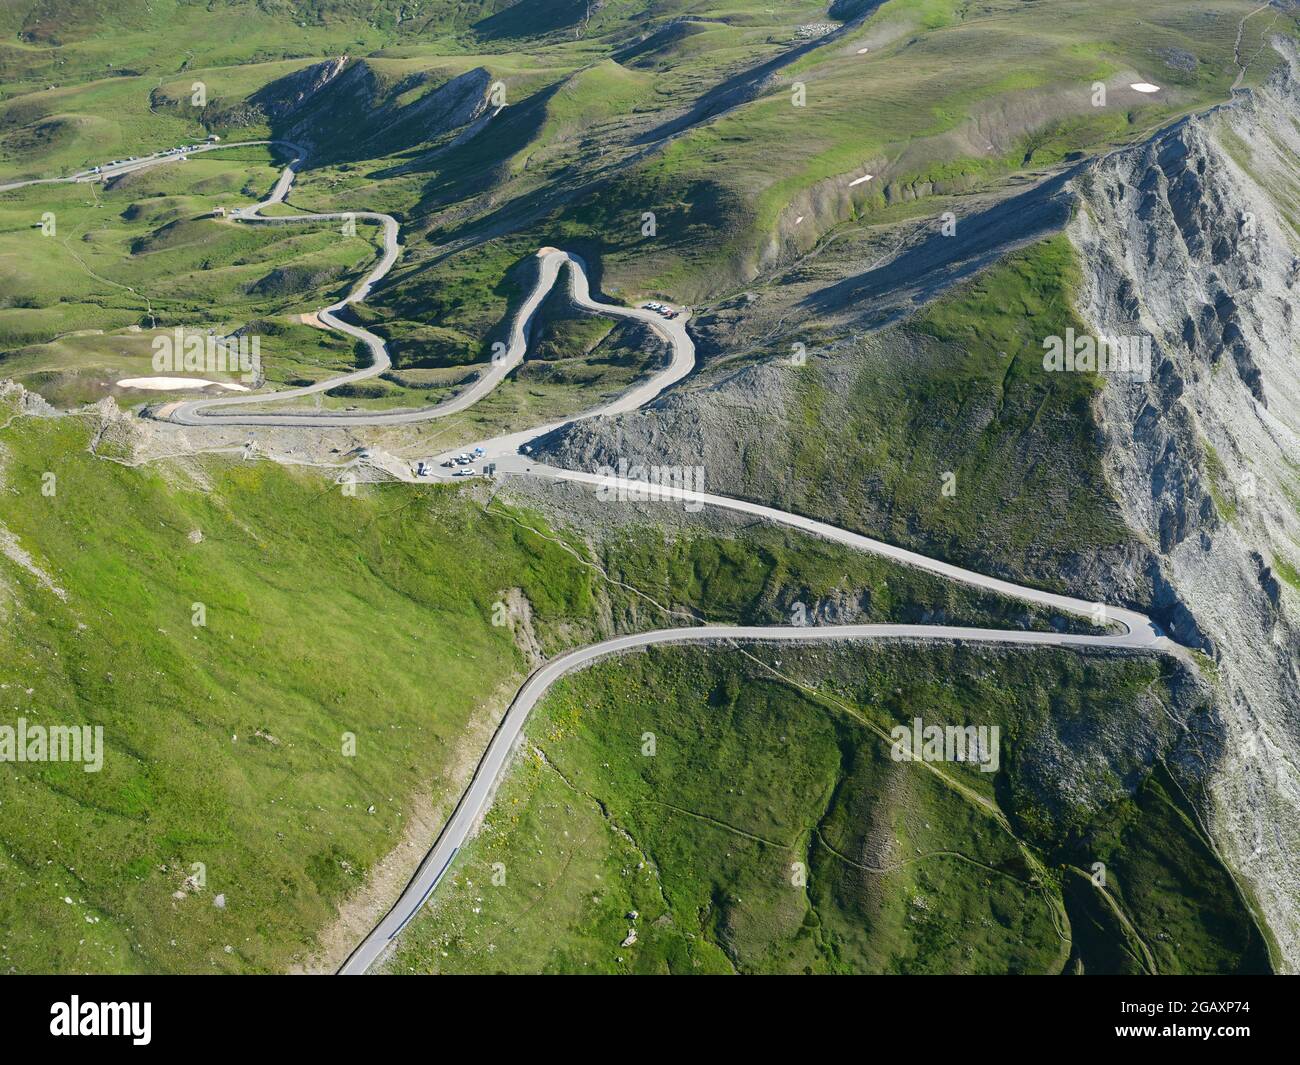 AERIAL VIEW. Agnel Pass separating Italy (foreground) from France, it is one of Europe's highest mountain pass at an altitude of 2744m. Stock Photo